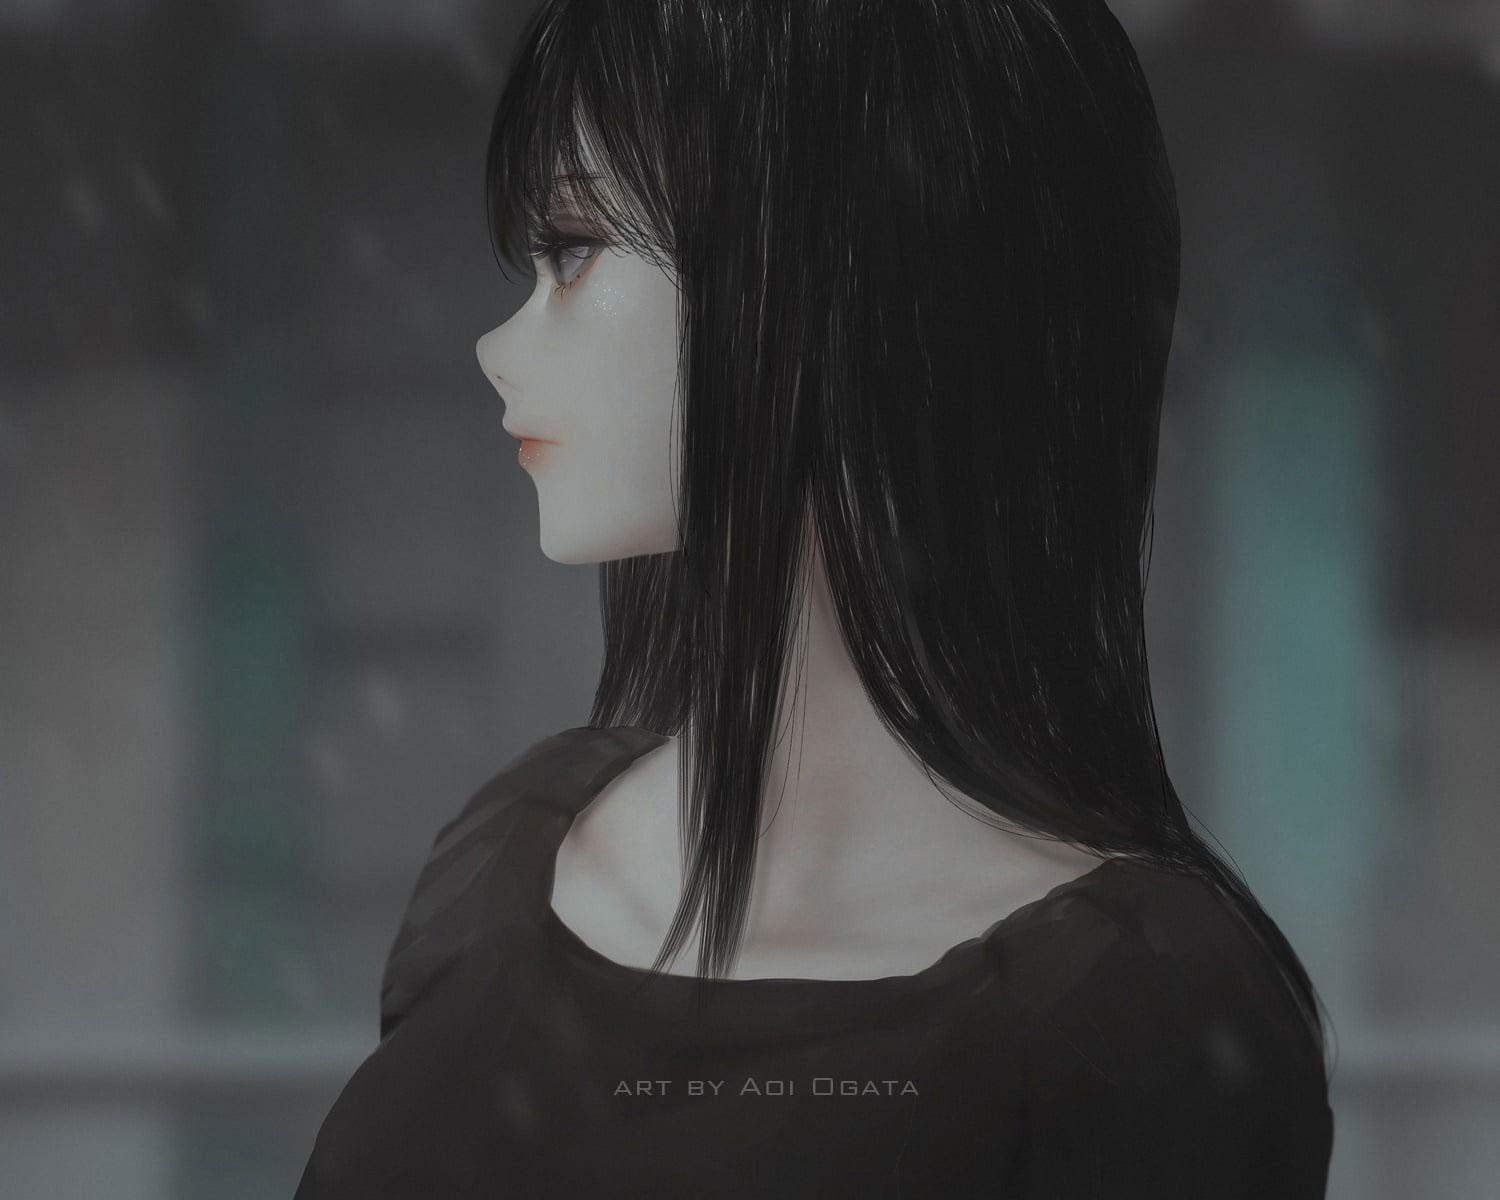 434256 Oni, Aoi Ogata, anime girls, original characters, anime, closed  eyes, creature, black hair - Rare Gallery HD Wallpapers